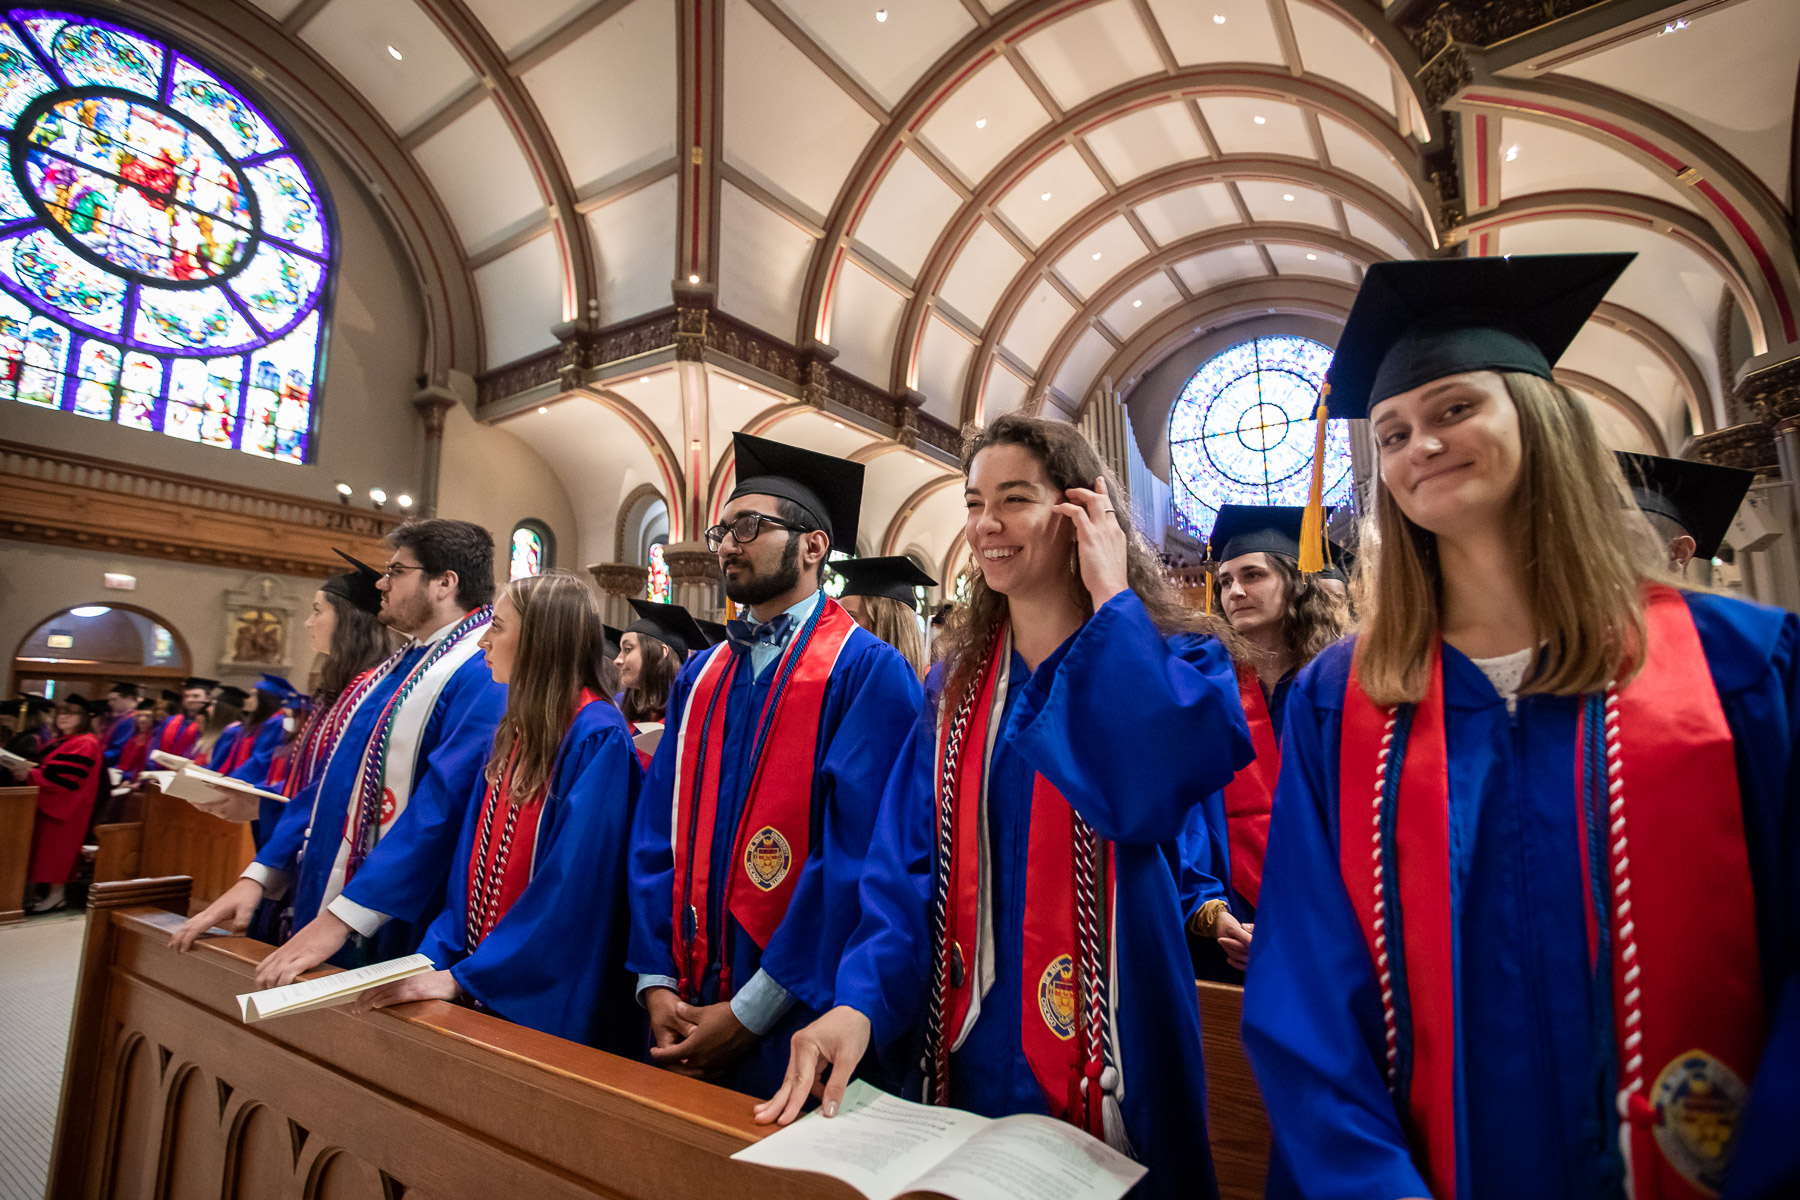 DePaul graduates donned their academic regalia for the traditional Baccalaureate Mass held at St. Vincent de Paul Church ahead of the weekend’s commencement ceremonies.